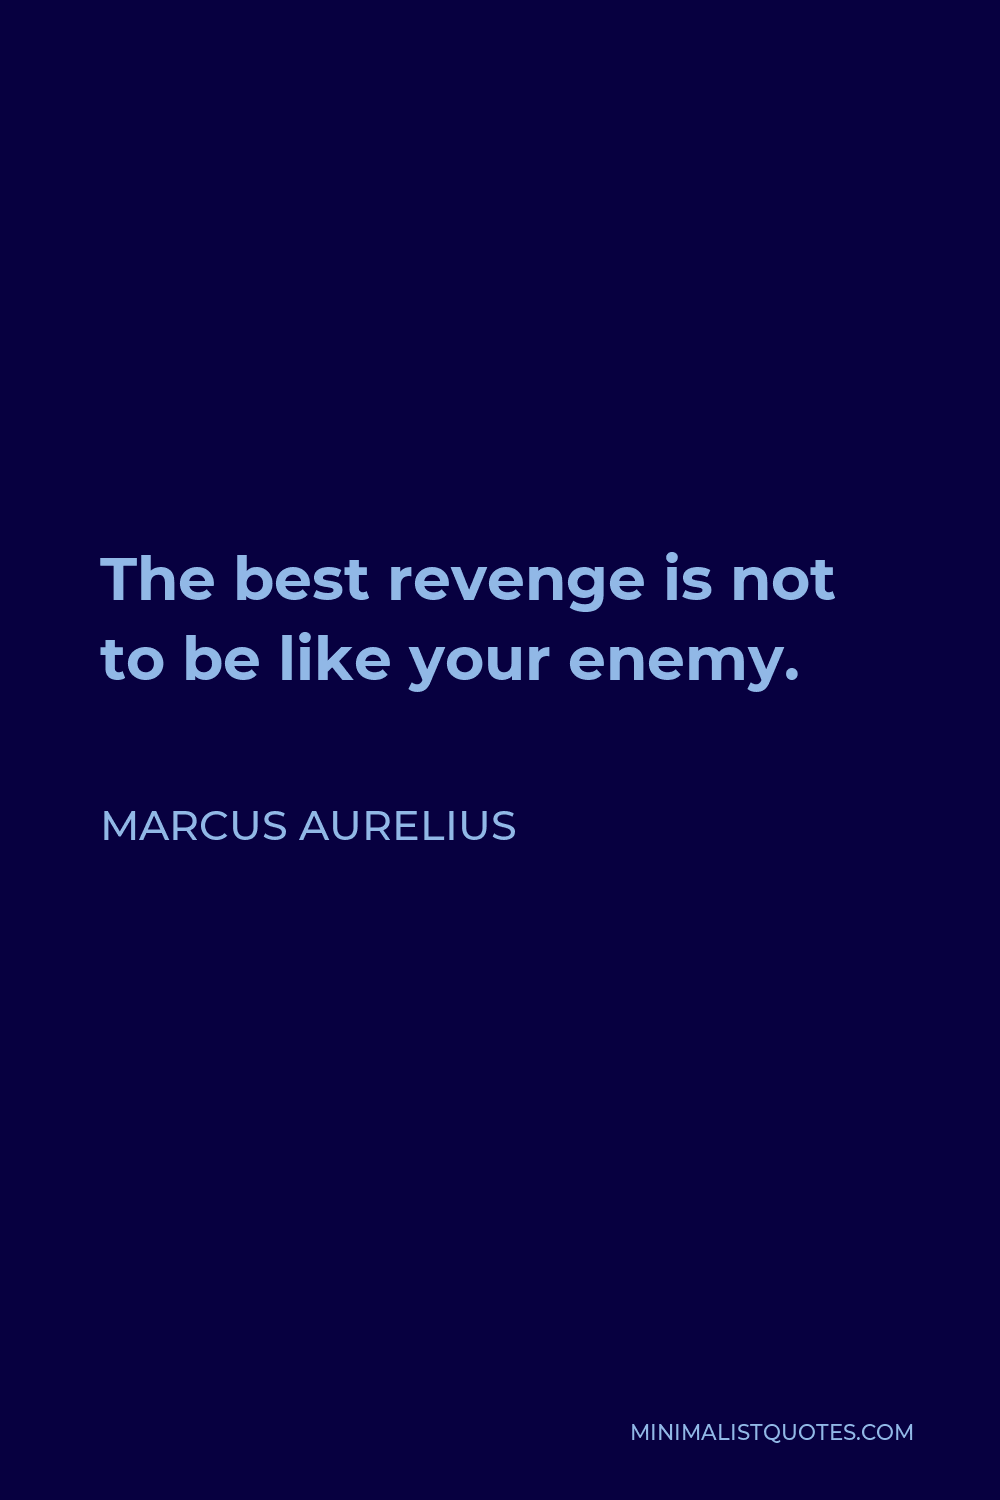 Marcus Aurelius Quote - The best revenge is not to be like your enemy.